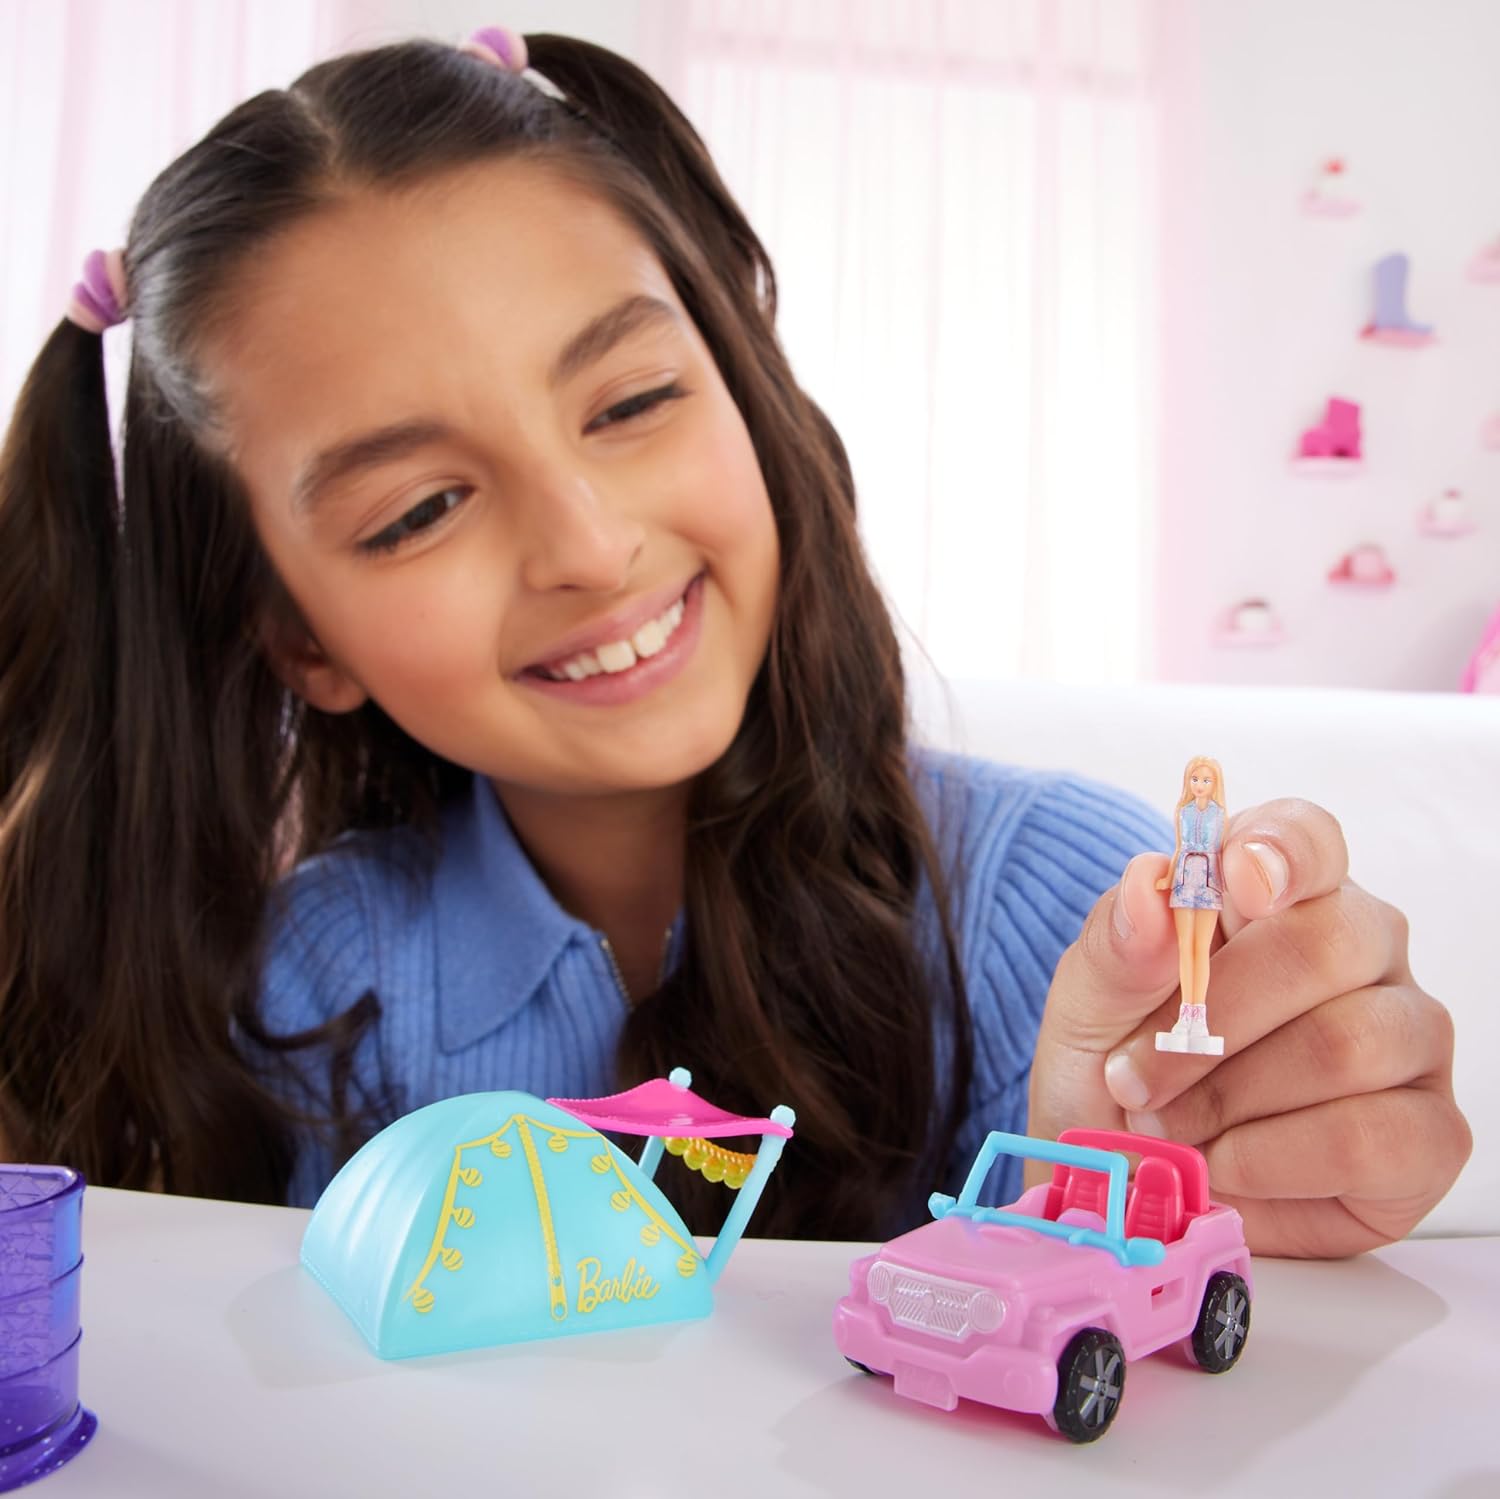 Barbie Mini BarbieLand Doll & Toy Vehicle Sets, 1.5-inch Doll & Iconic Toy Vehicle with Color-Change Surprise JEEP With Tint